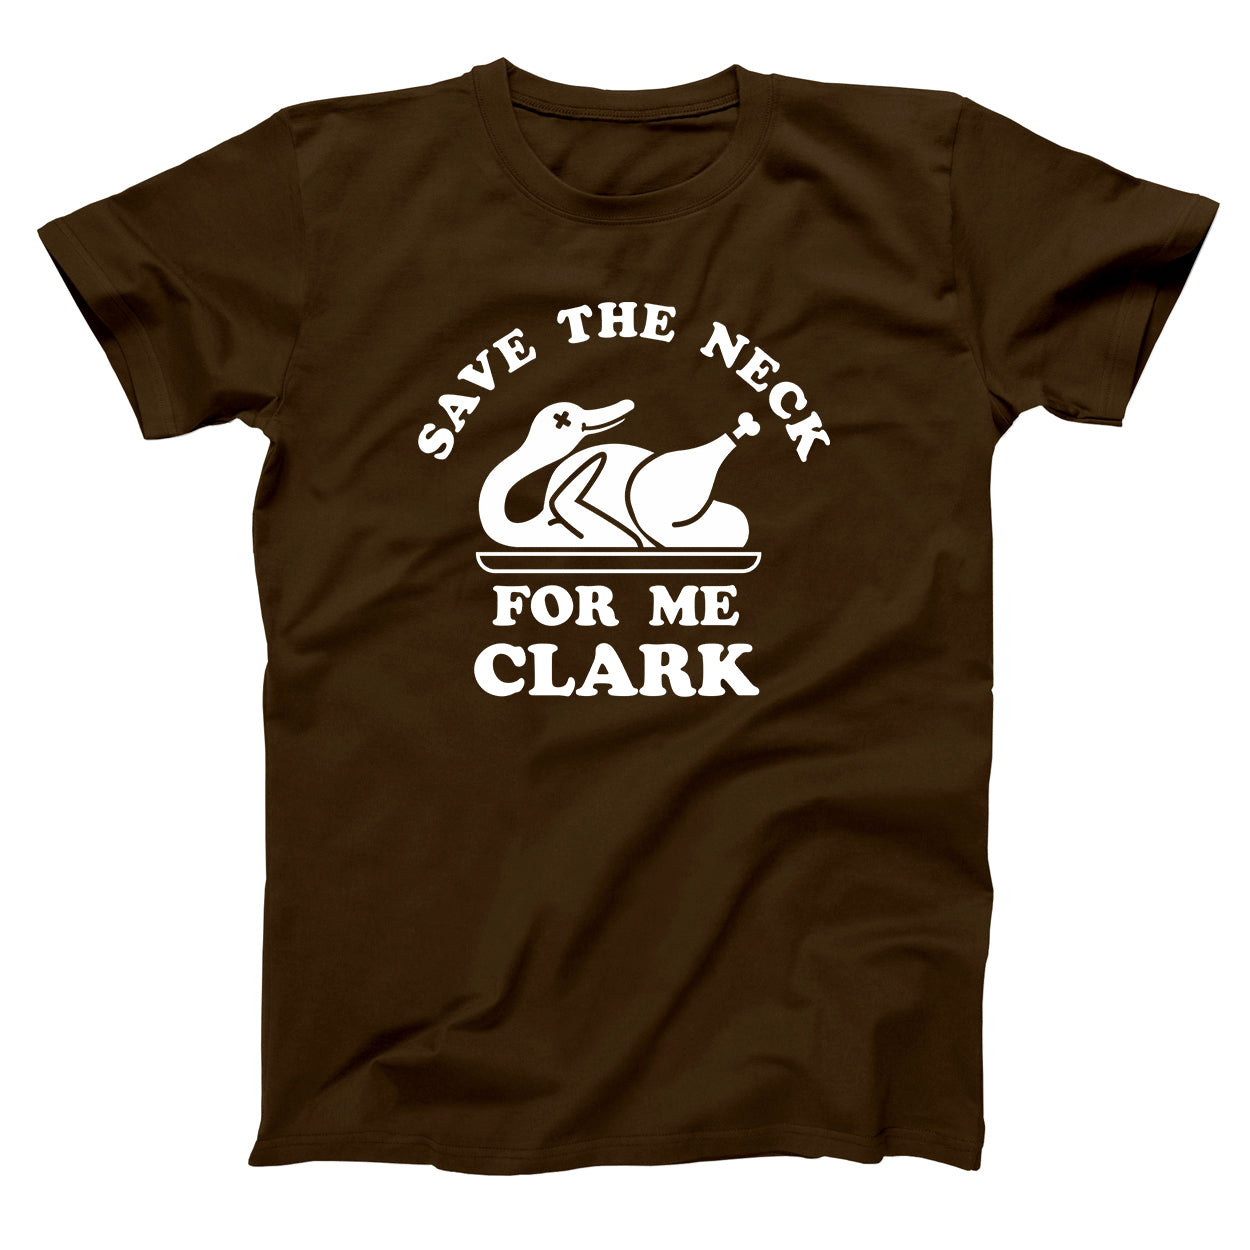 Save The Neck For Me Clark Tshirt - Donkey Tees